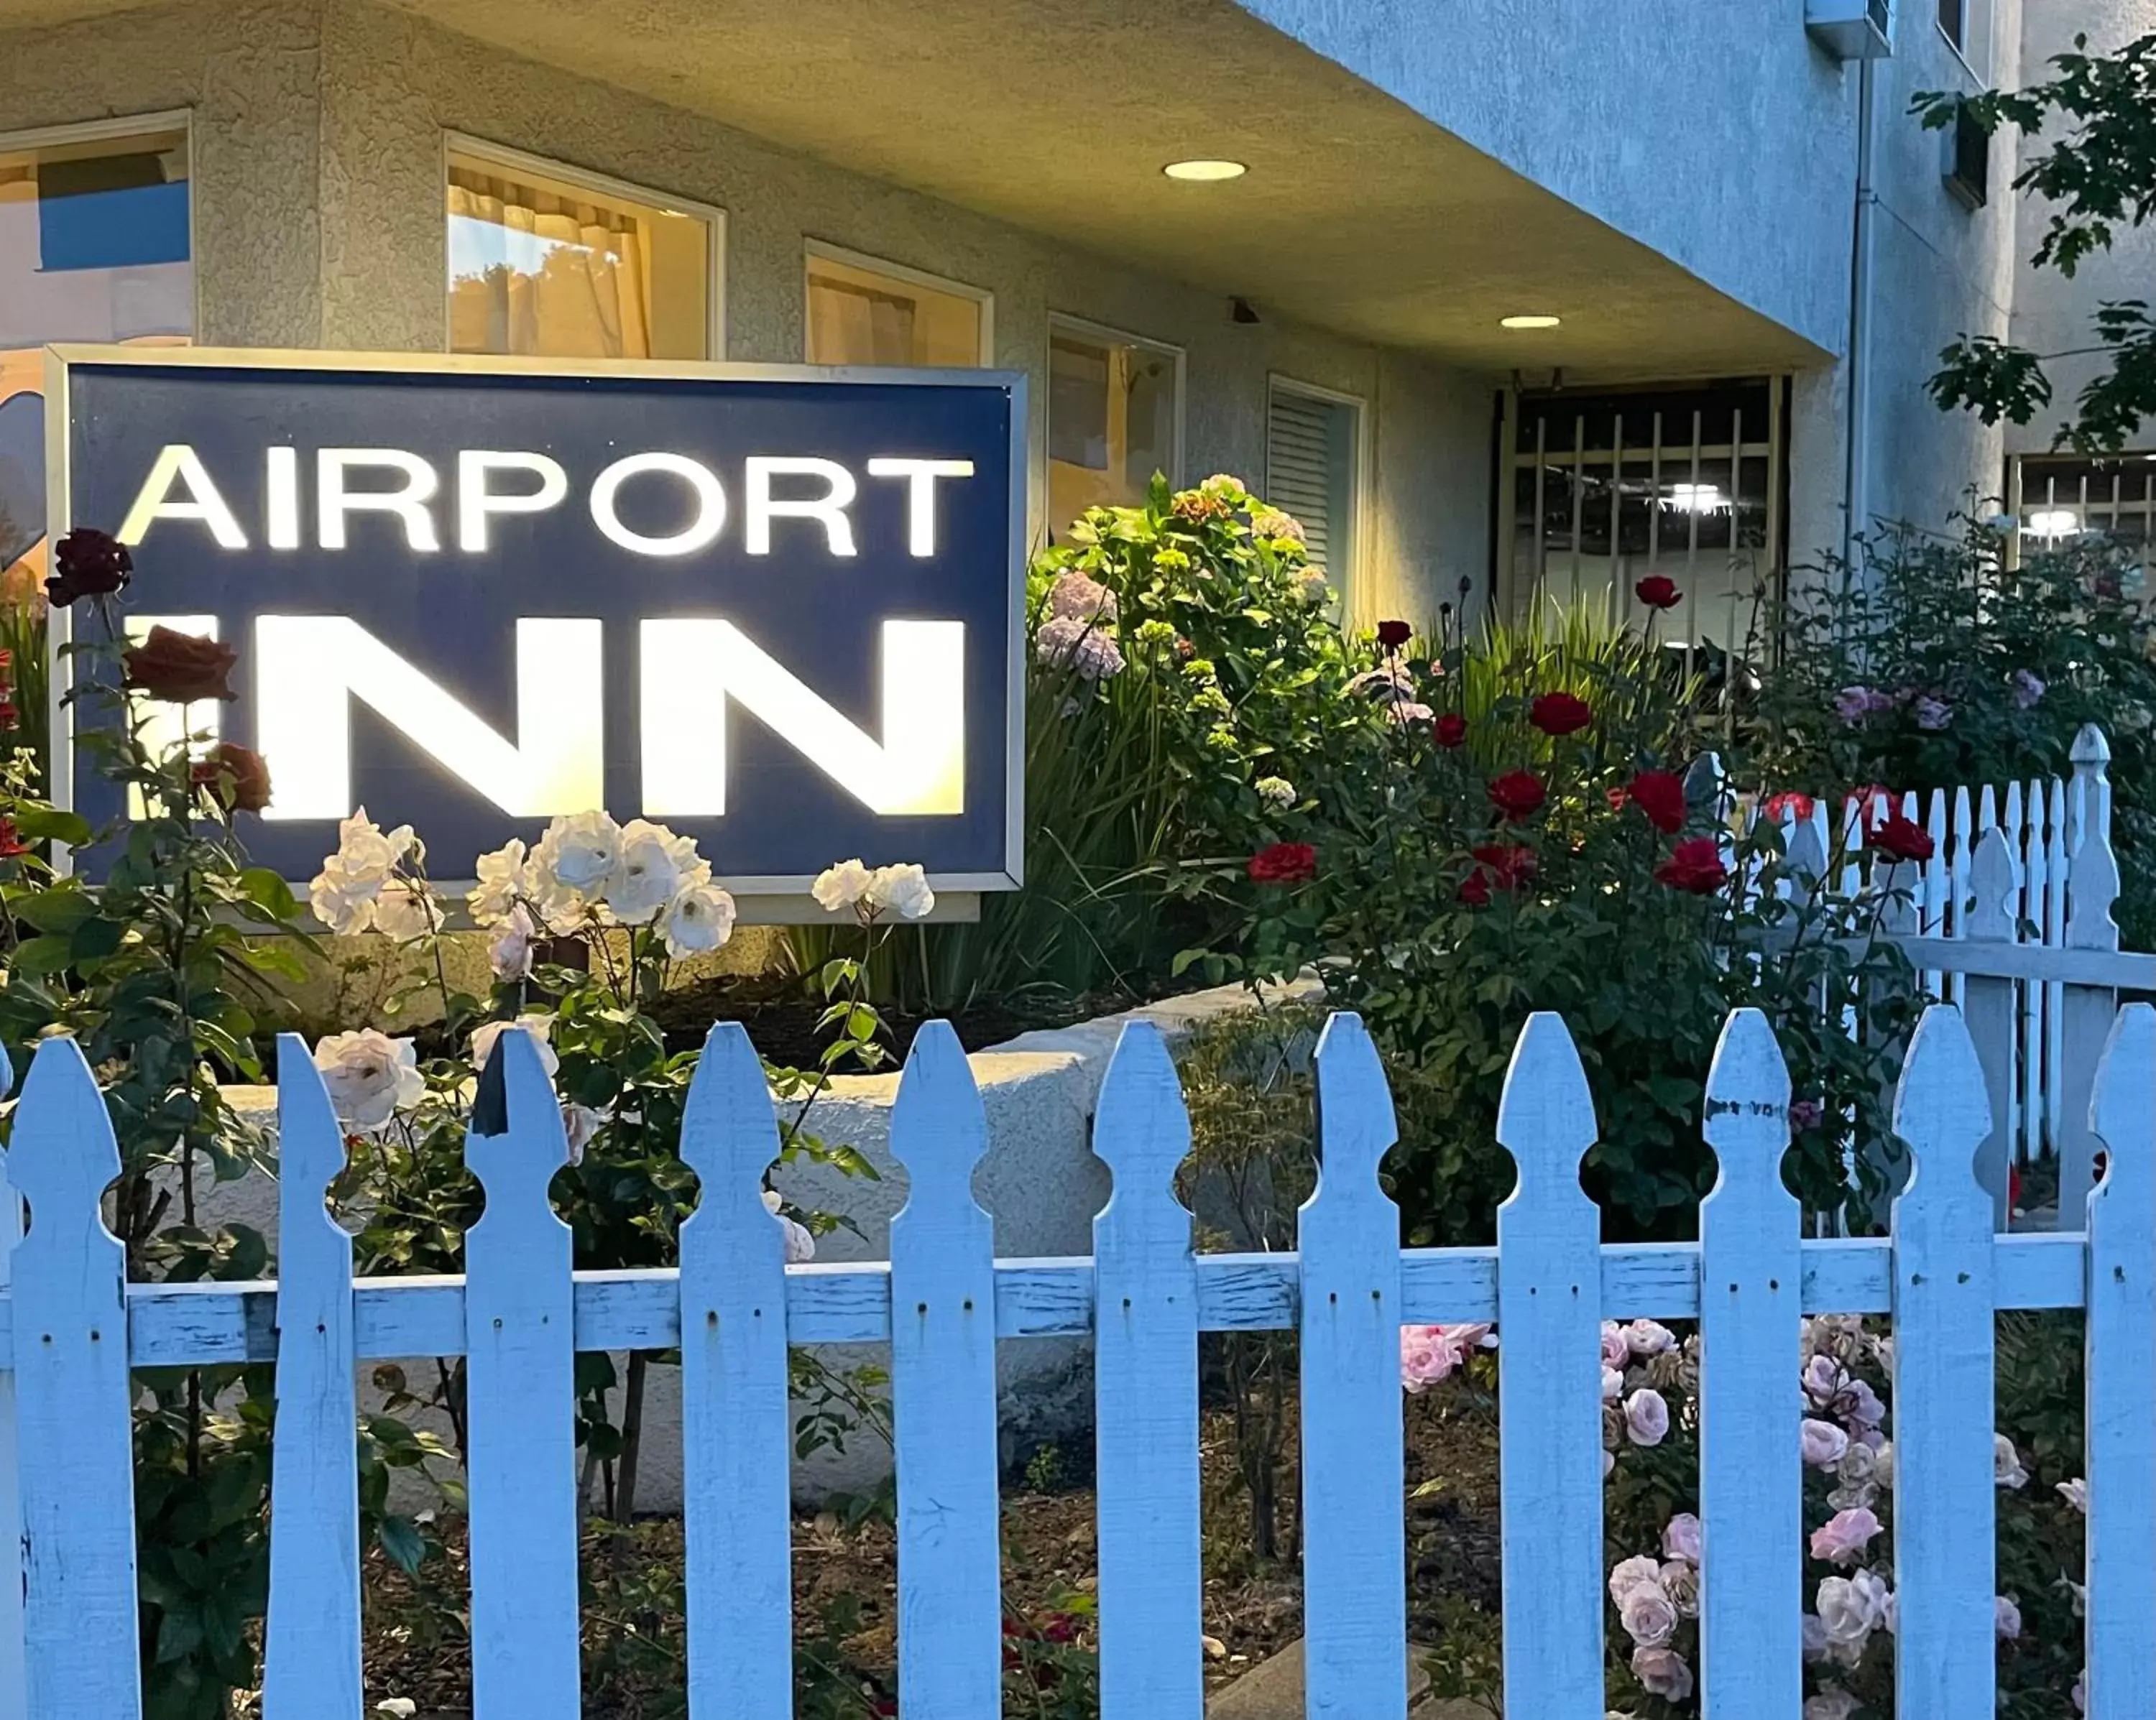 Property building in Airport Inn